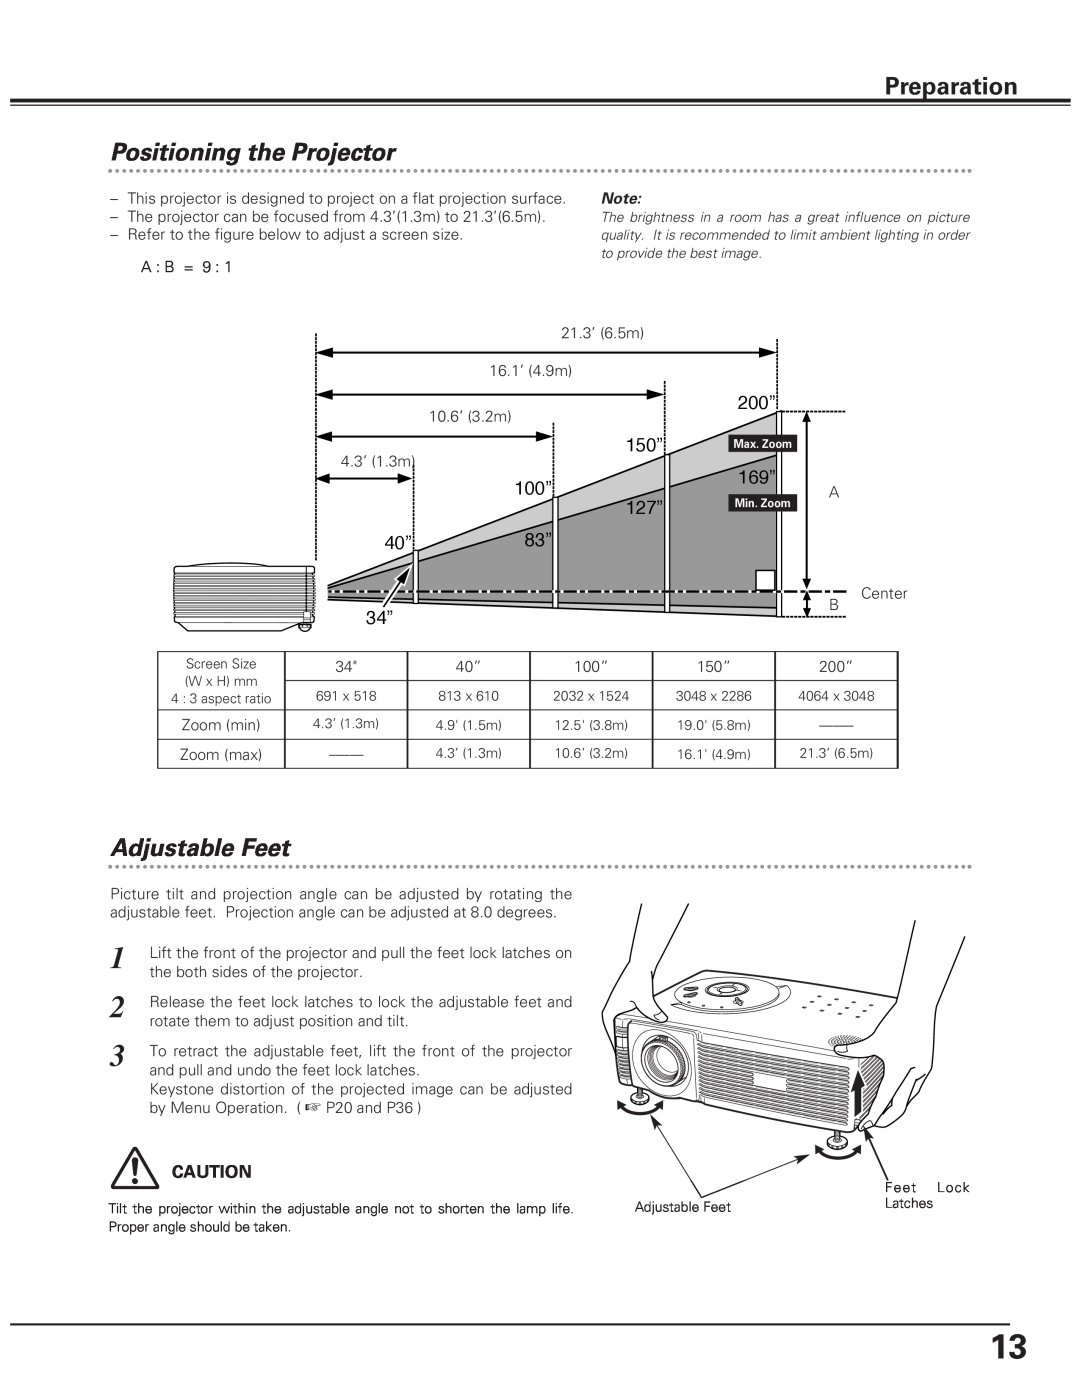 Eiki LC-SD10 owner manual Preparation, Positioning the Projector, Adjustable Feet, 200”, 169”, 150”, 100”, 127” 